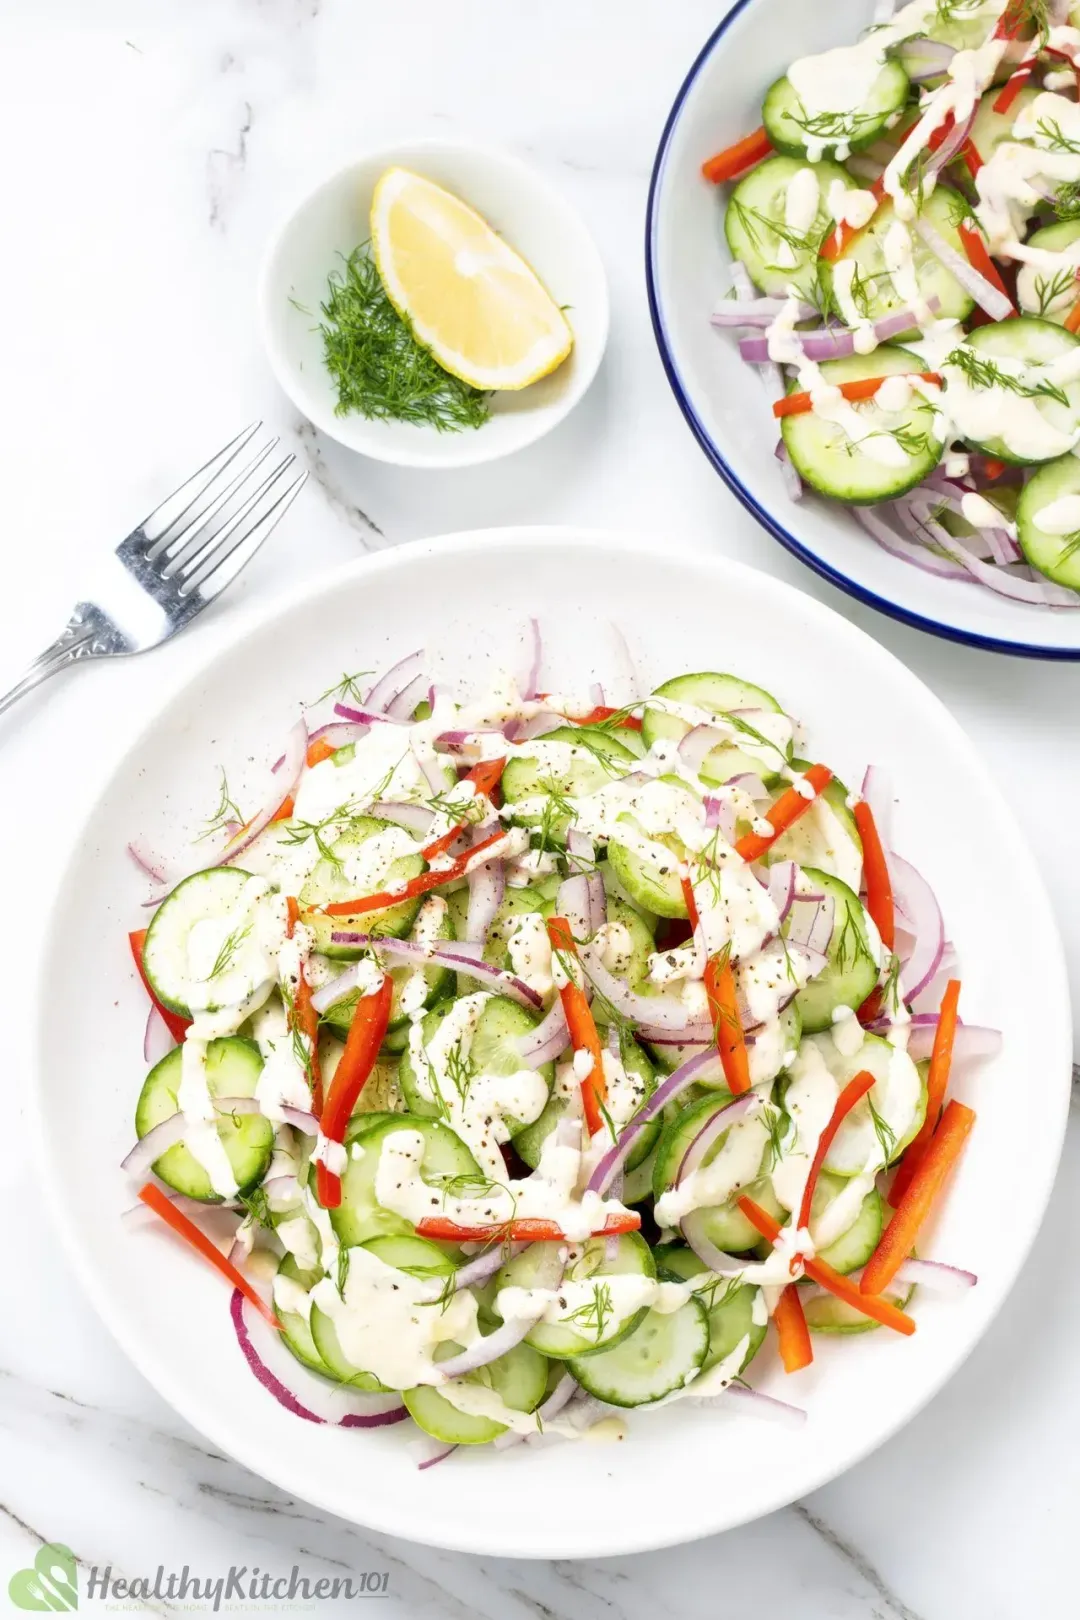 Healthy cucumber salad on two plates with sliced cucumbers, sliced red peppers, red onions, and a light dressing.